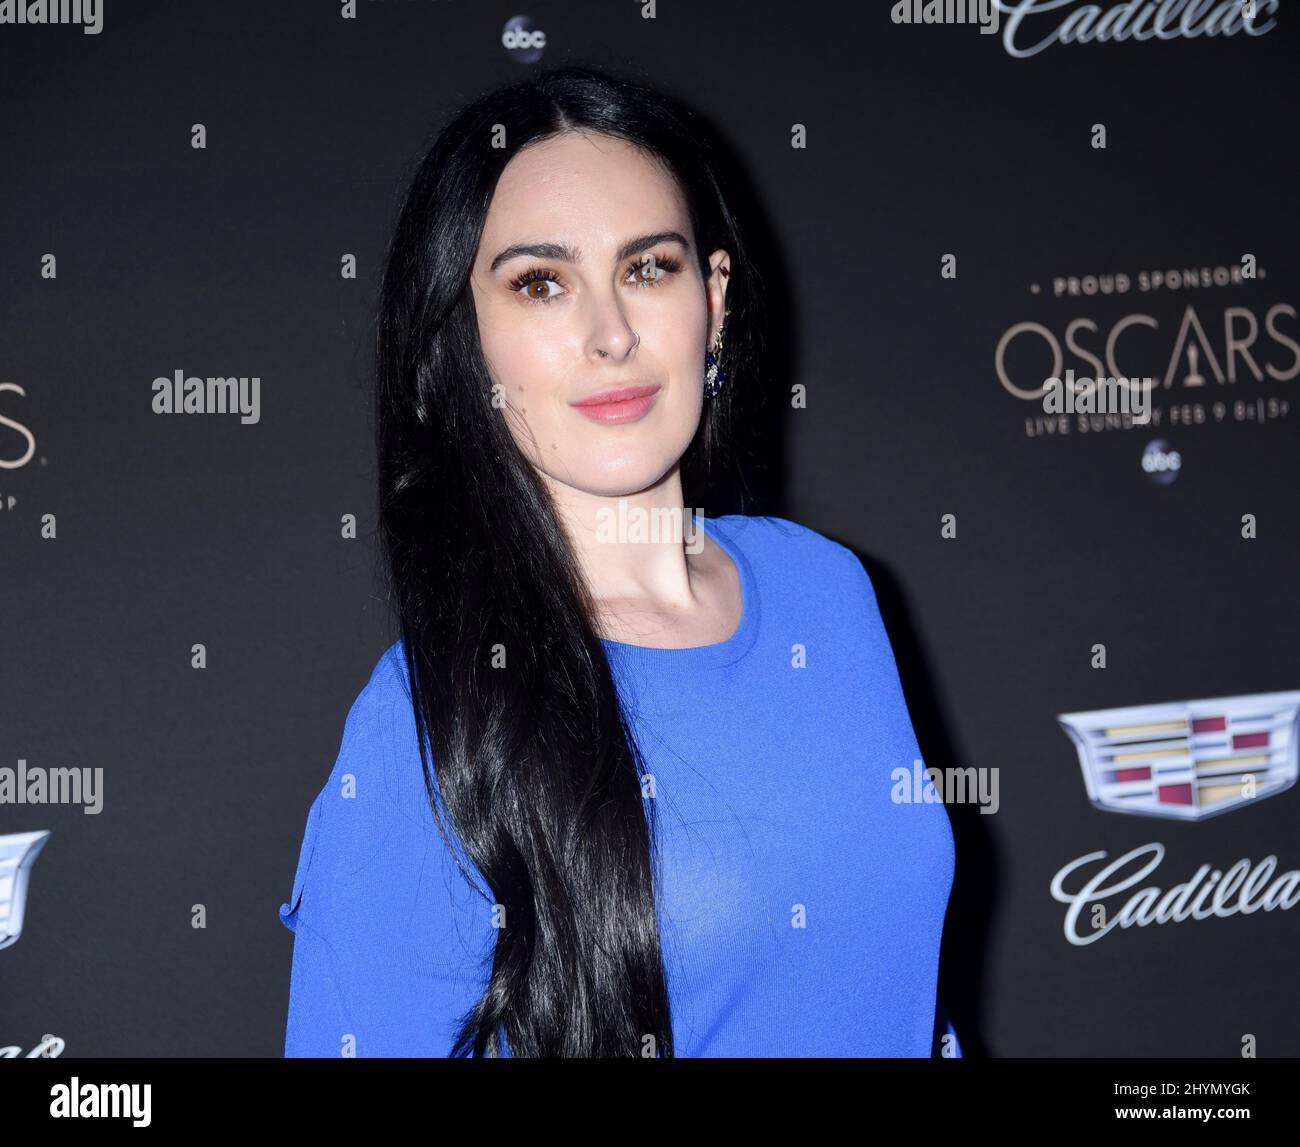 Rumer Willis at Cadillac's Annual Oscar Week Party to Celebrate 92nd ...